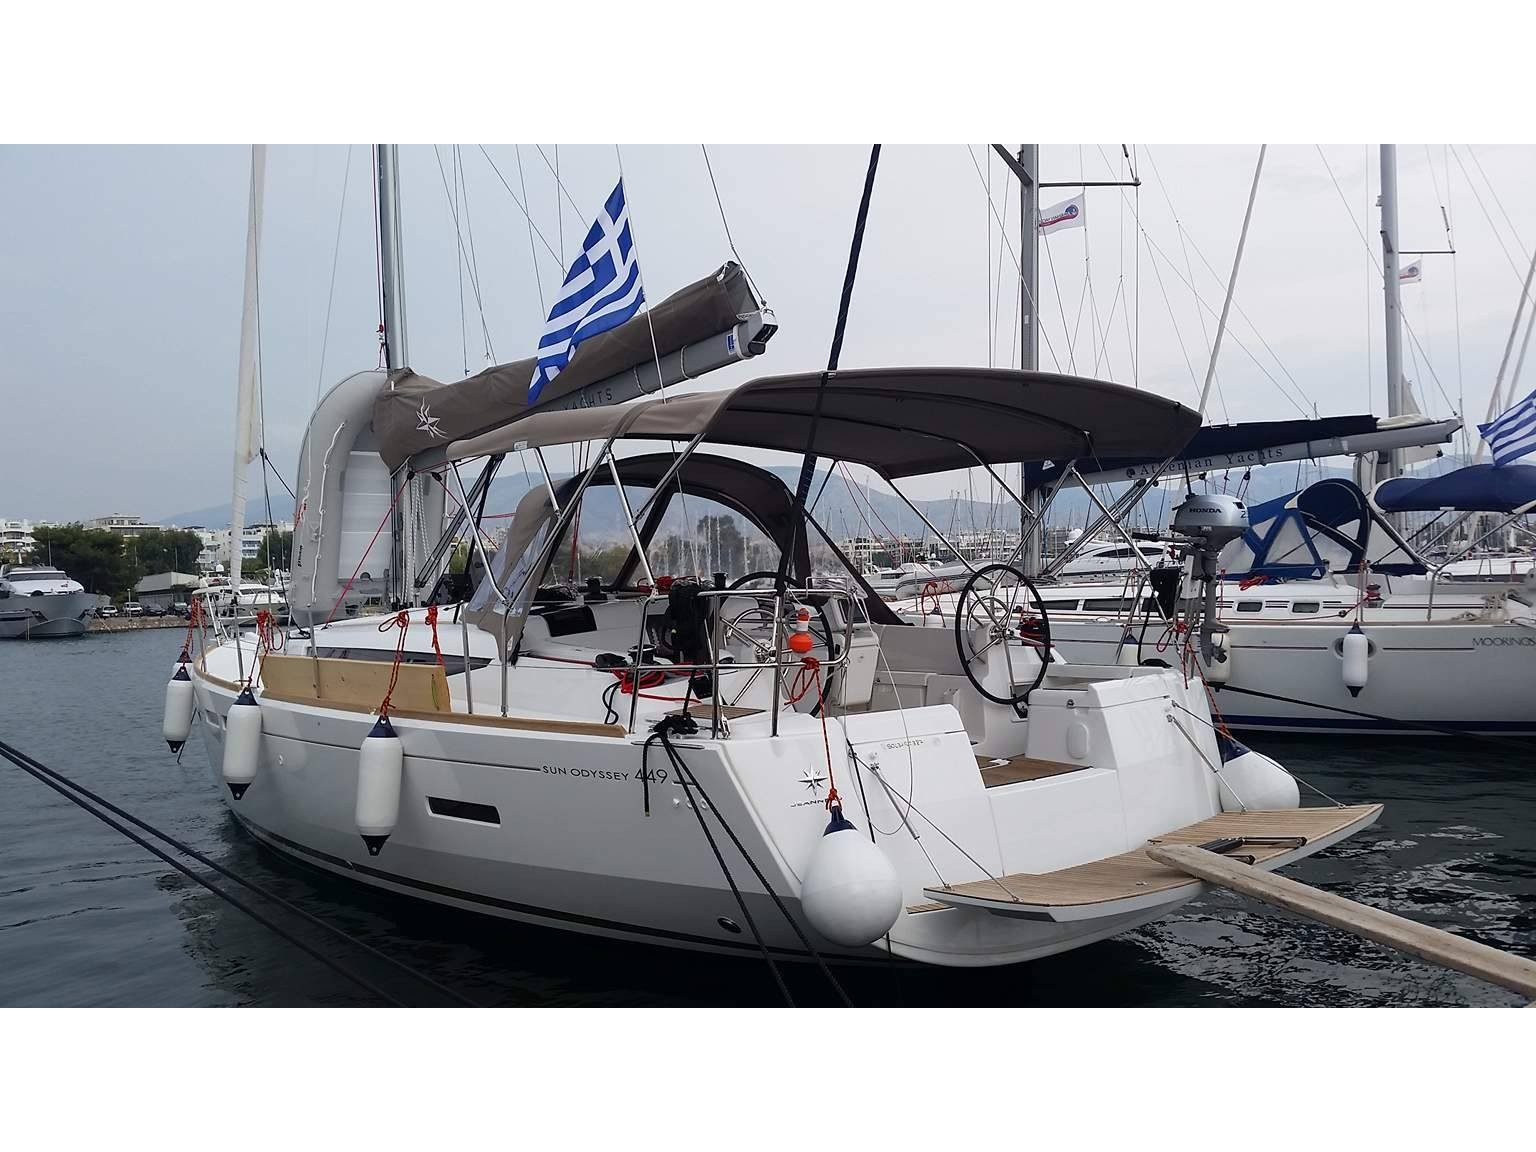 Sun Odyssey 449 - Yacht Charter East End Bay & Boat hire in Greece Cyclades Islands Paros Paros Piso Livadi Port 3